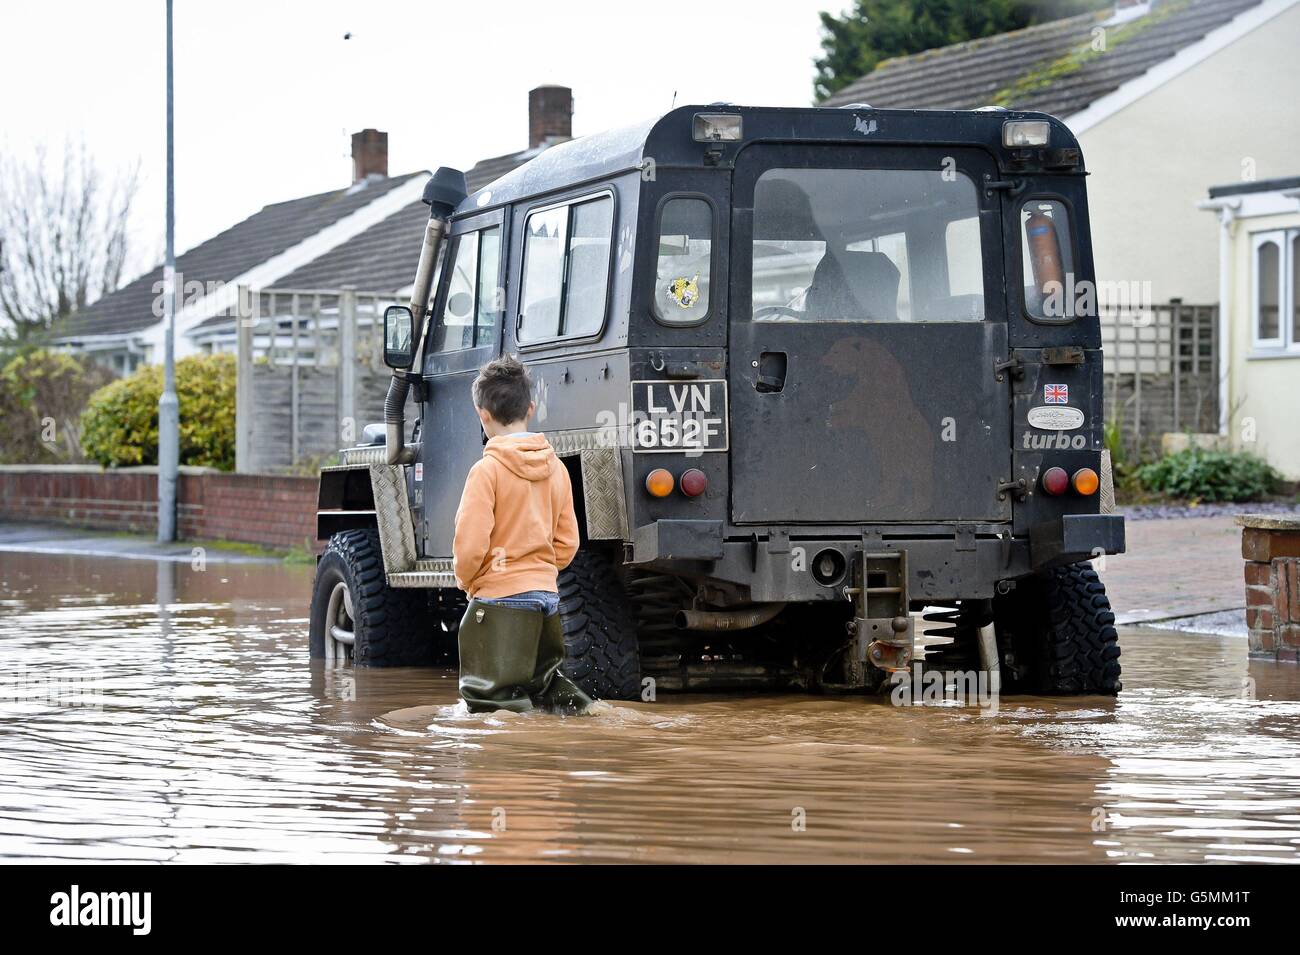 A boy inspects a 4x4 vehicle as it manages to keep above the water in the Somerset village of Ruishton, near Taunton, which has been flooded after the River Tone burst it's banks. Stock Photo